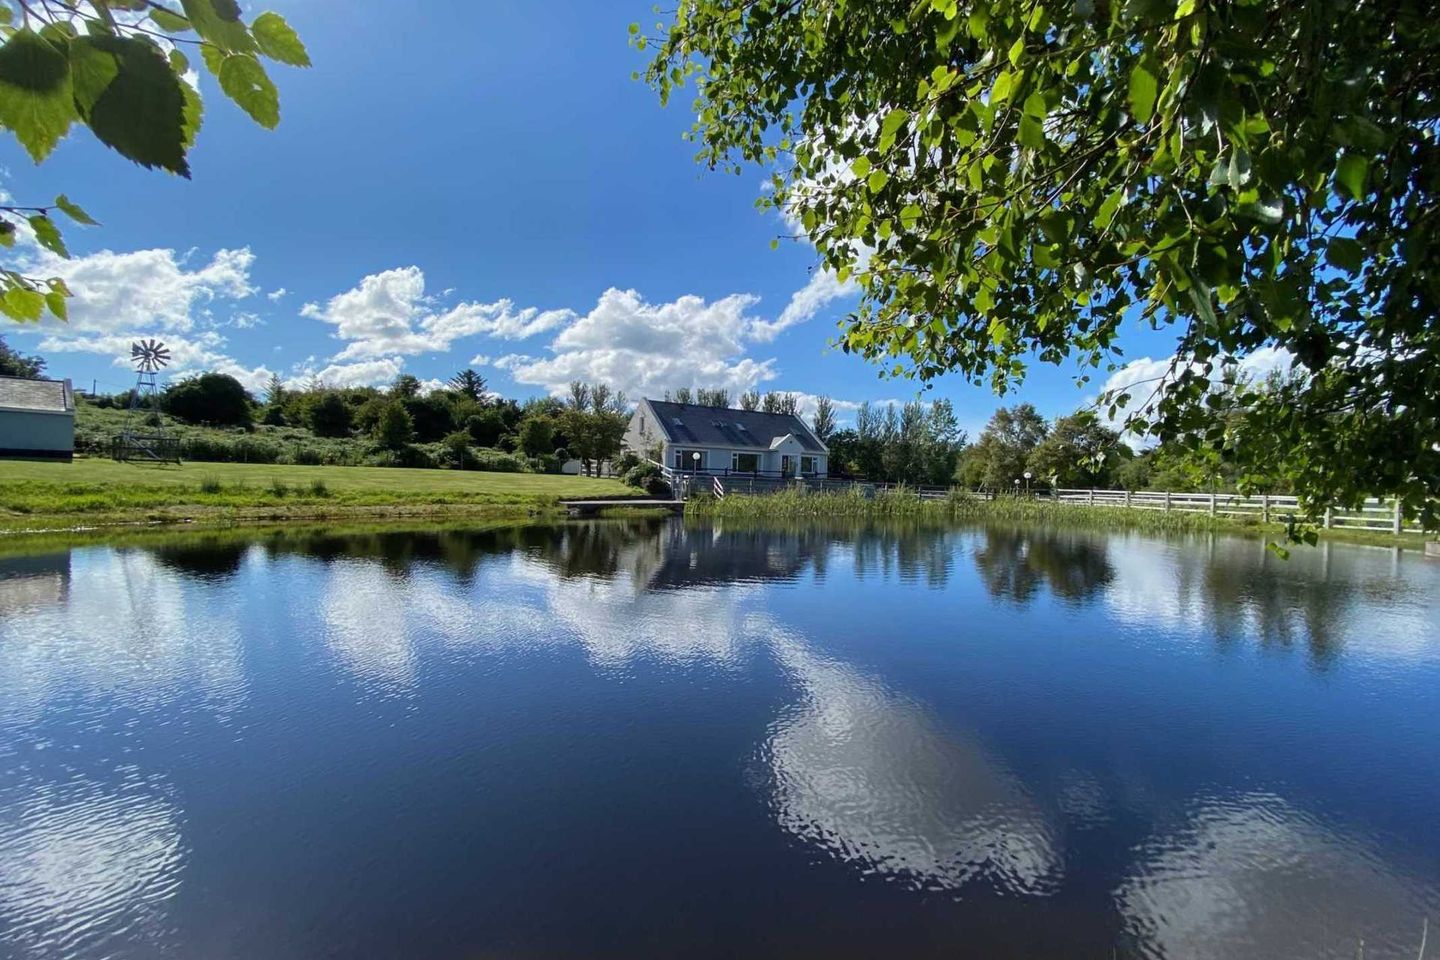 Oughterard Holiday Hostel And Angling Centre, Station Road, Oughterard, Co. Galway